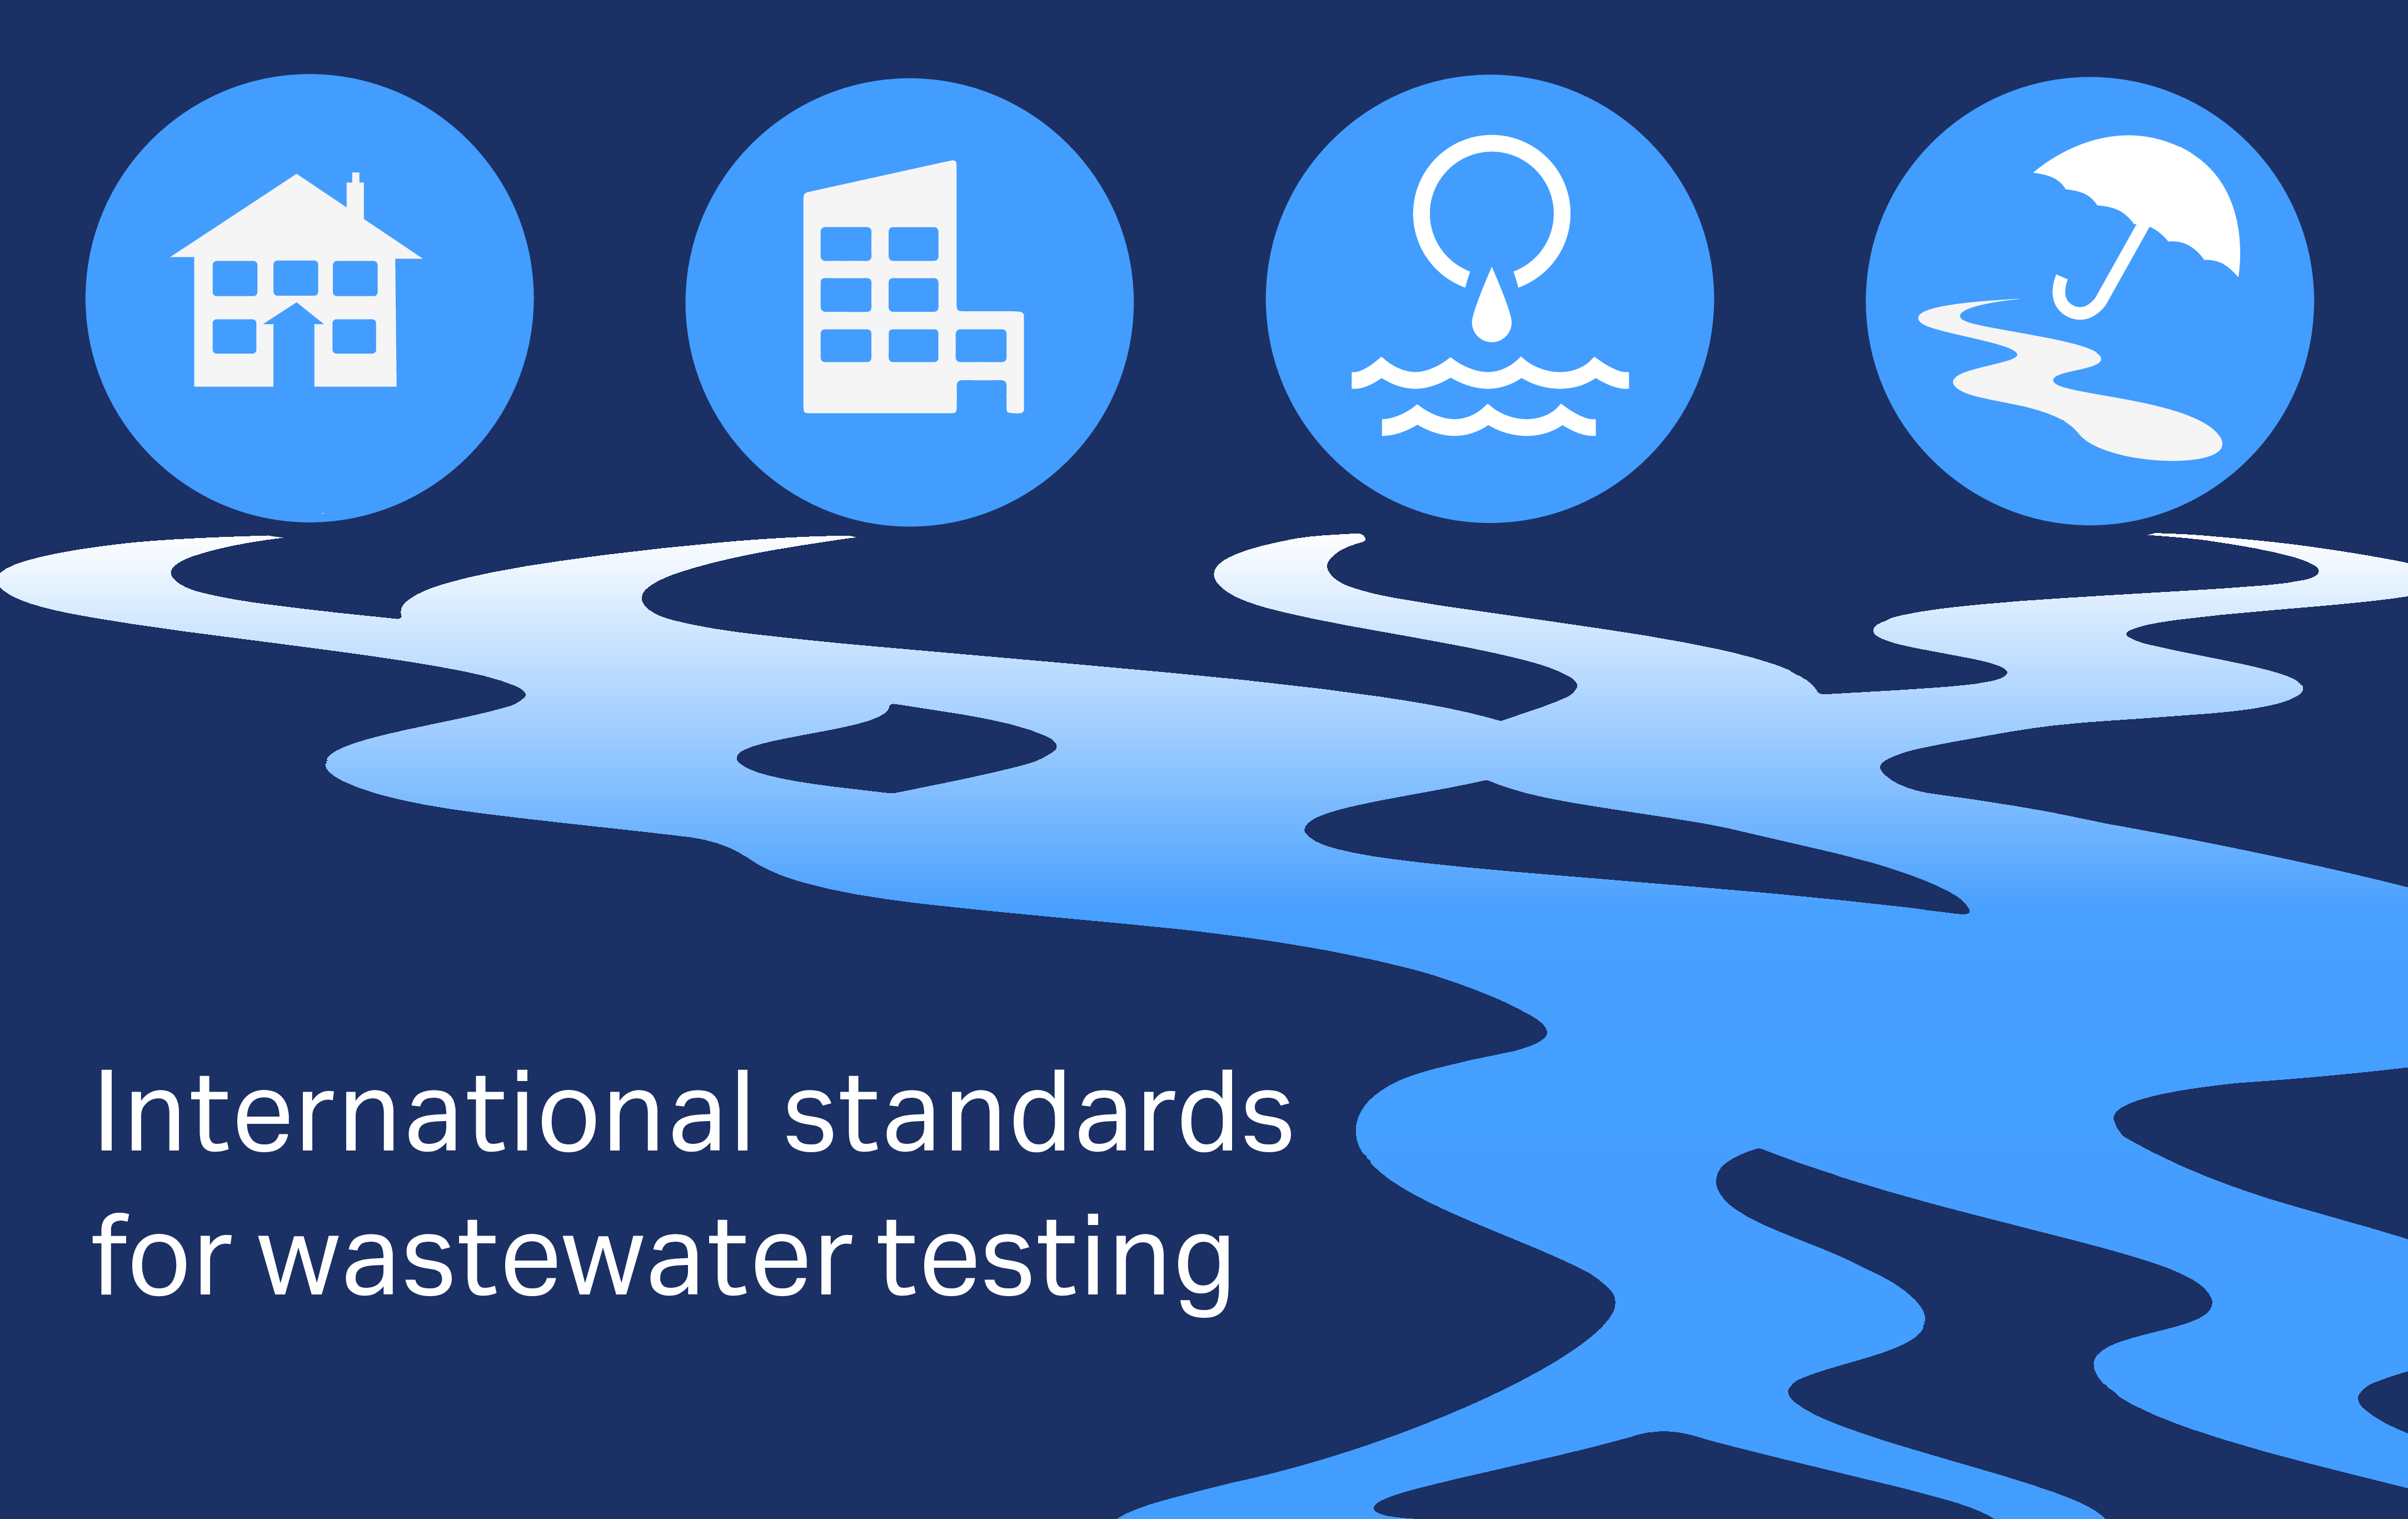 Wastewater-Infographic-image-v2